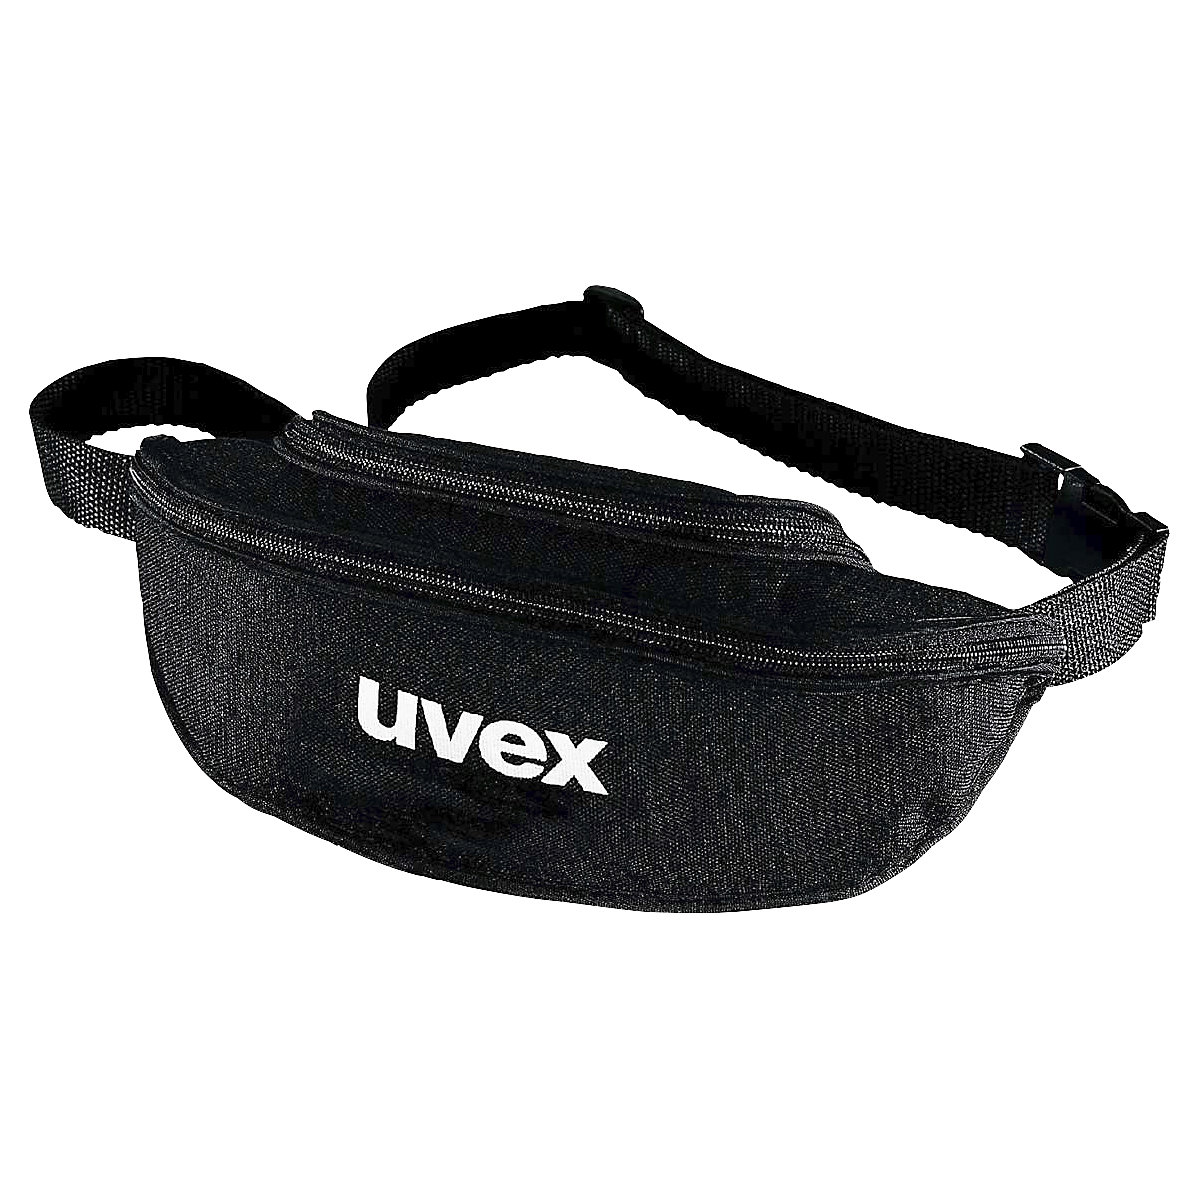 9954501 spectacle case for full vision goggles - Uvex